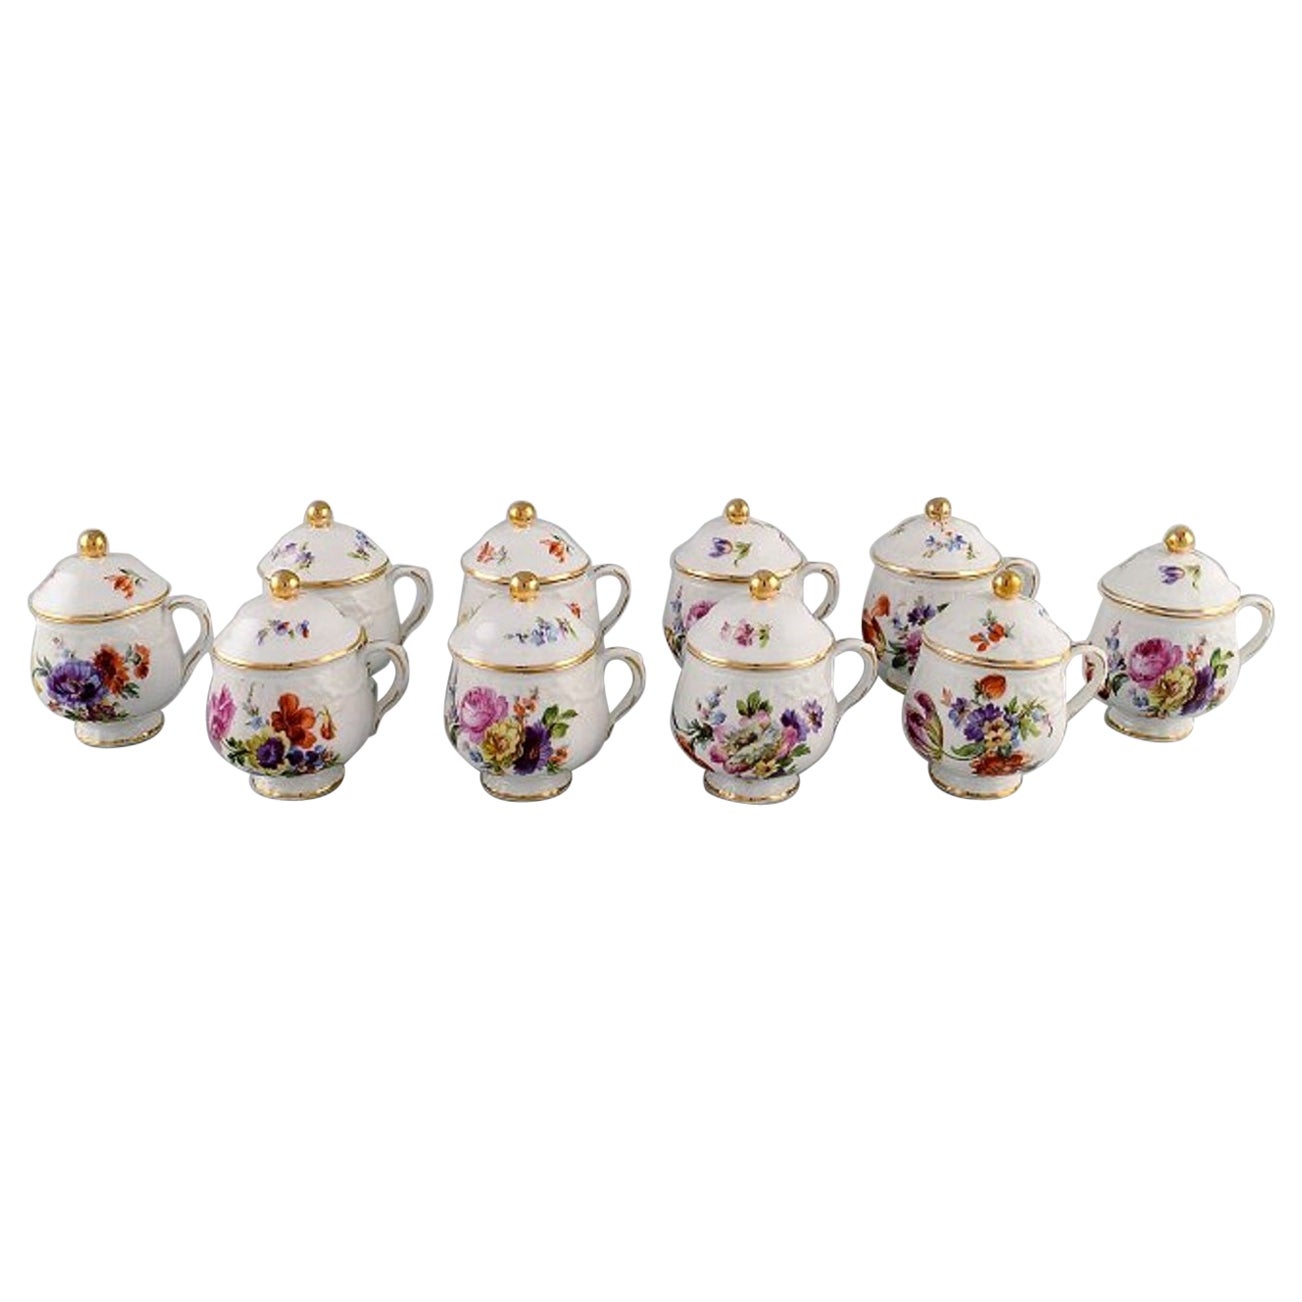 10 Antique Rörstrand Porcelain Cream Cups with Hand-Painted Flowers